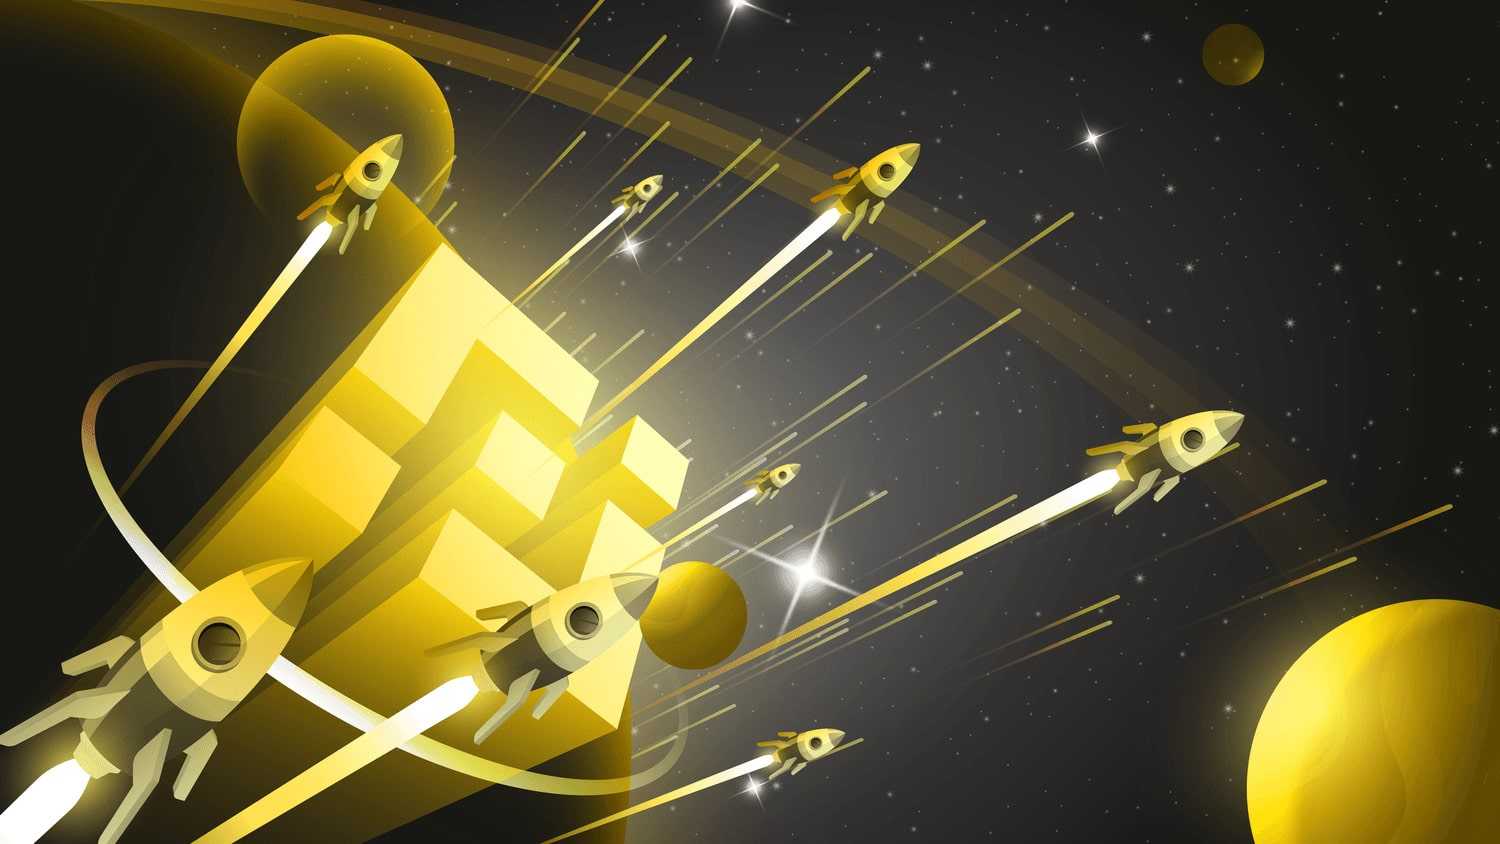 Binance Launchpad is a platform that allows projects to raise capital